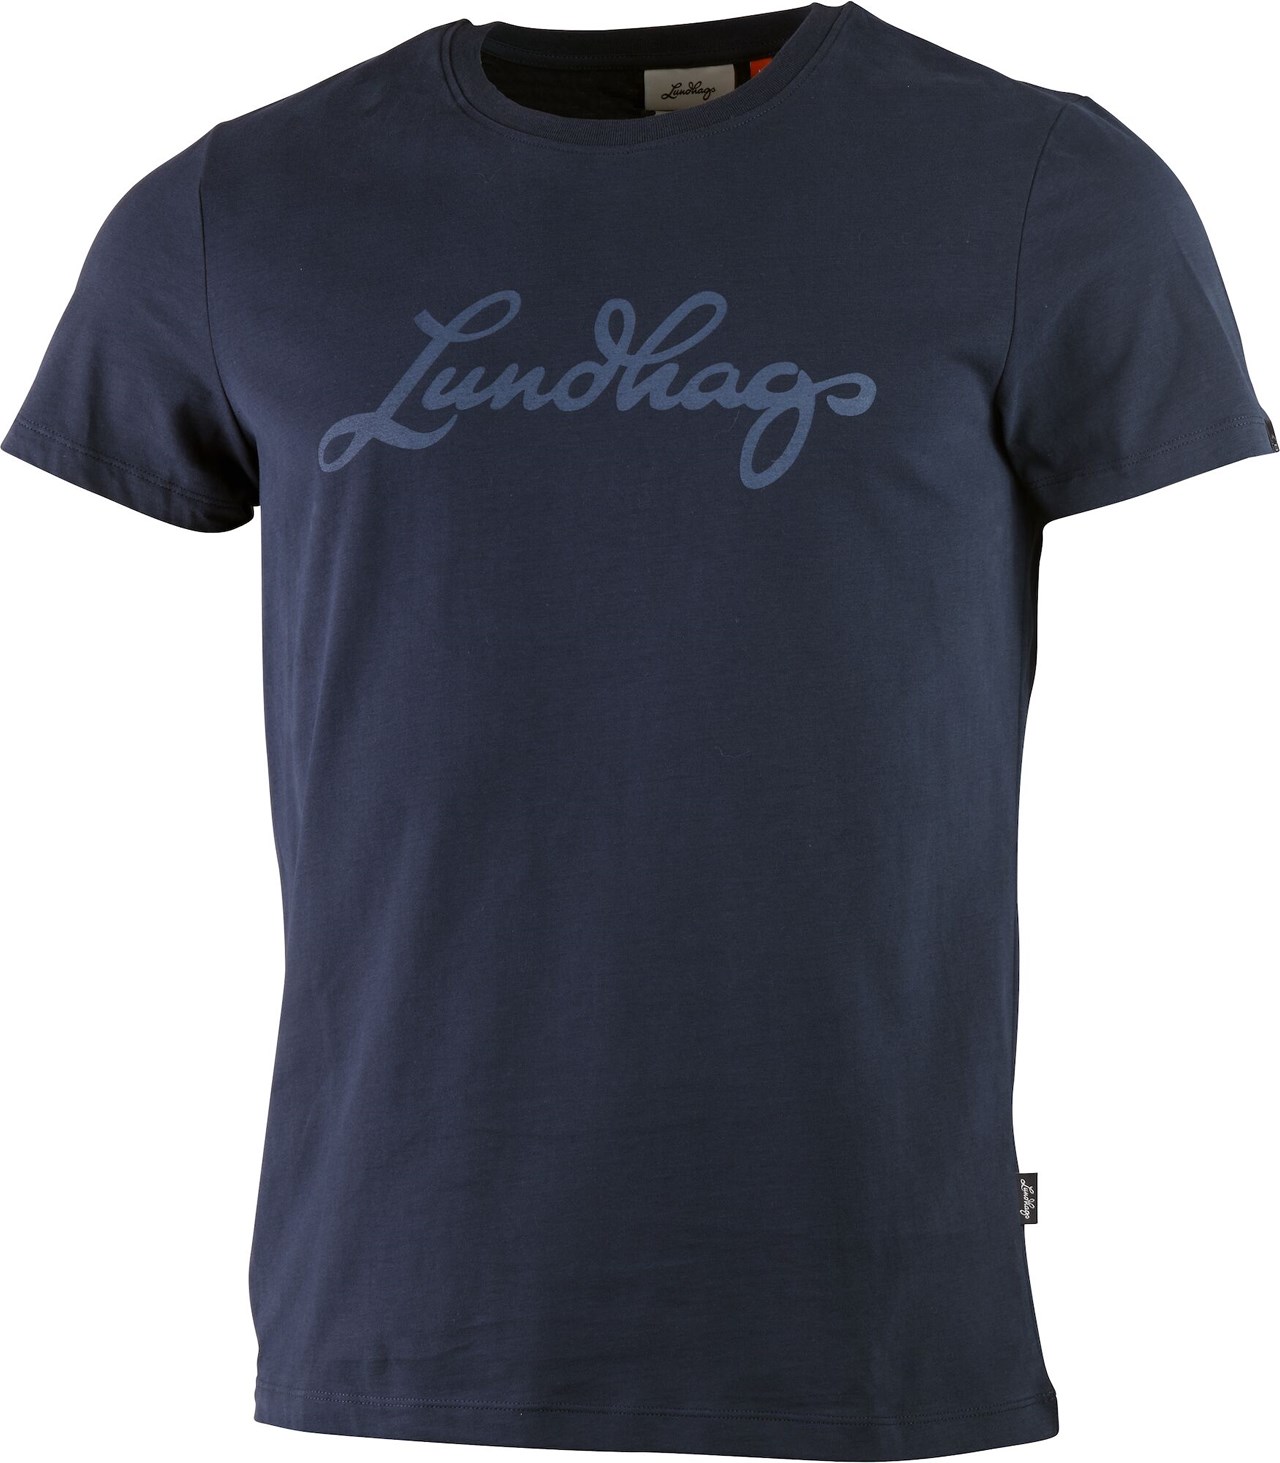 Lundhags  Ms Tee